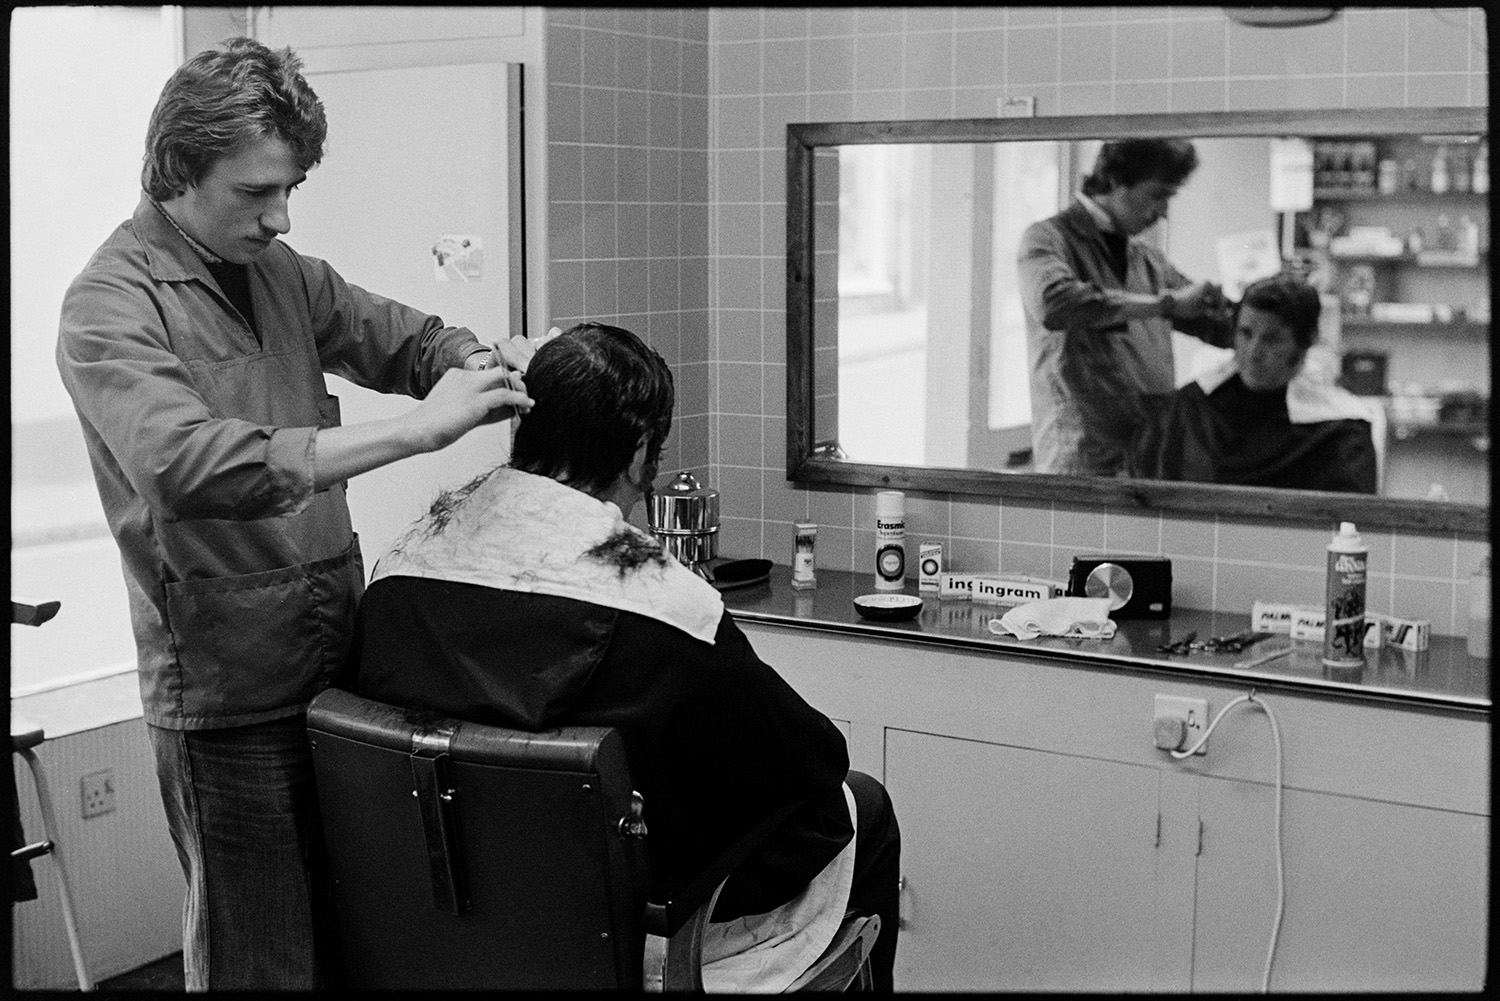 Barber cutting man's hair. 
[A barber cutting a man's hair in a barber shop in Torrington. A mirror is on the wall and various items including hairspray and scissors are on the counter.]